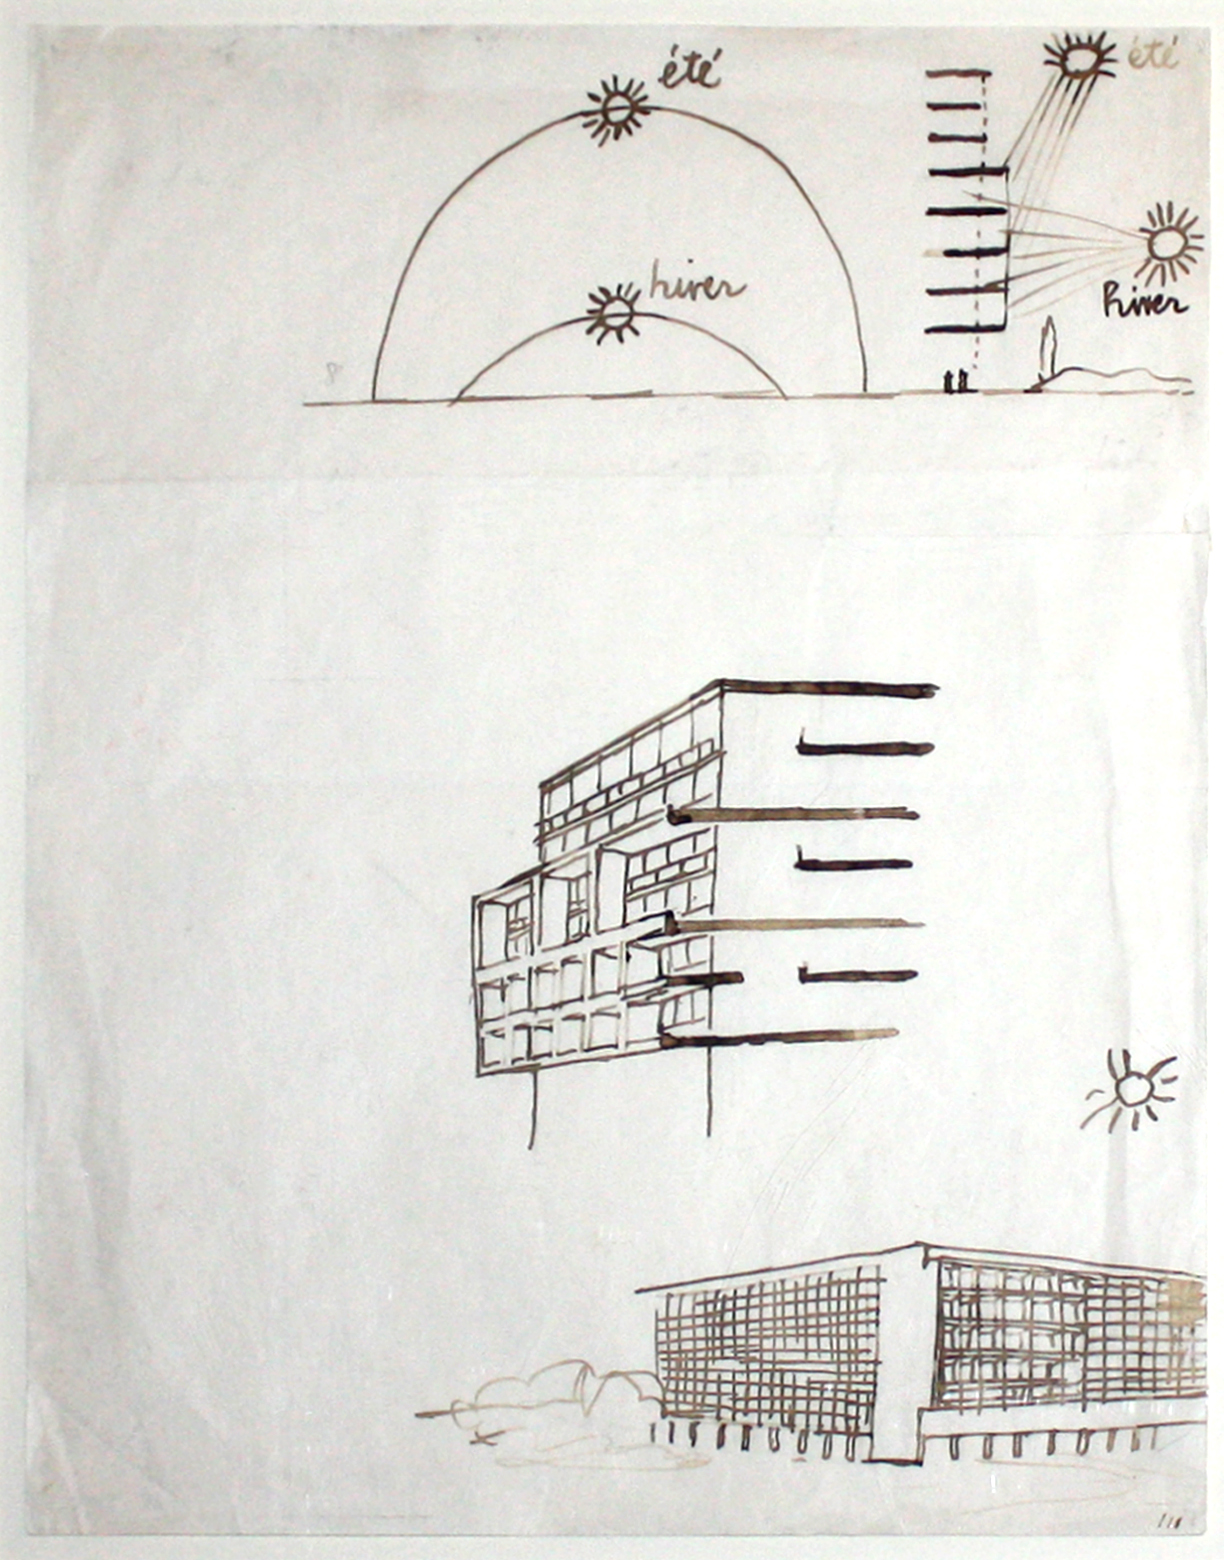 Le Corbusier, Sketches Illustrating The Principle of the Brise-Soleil